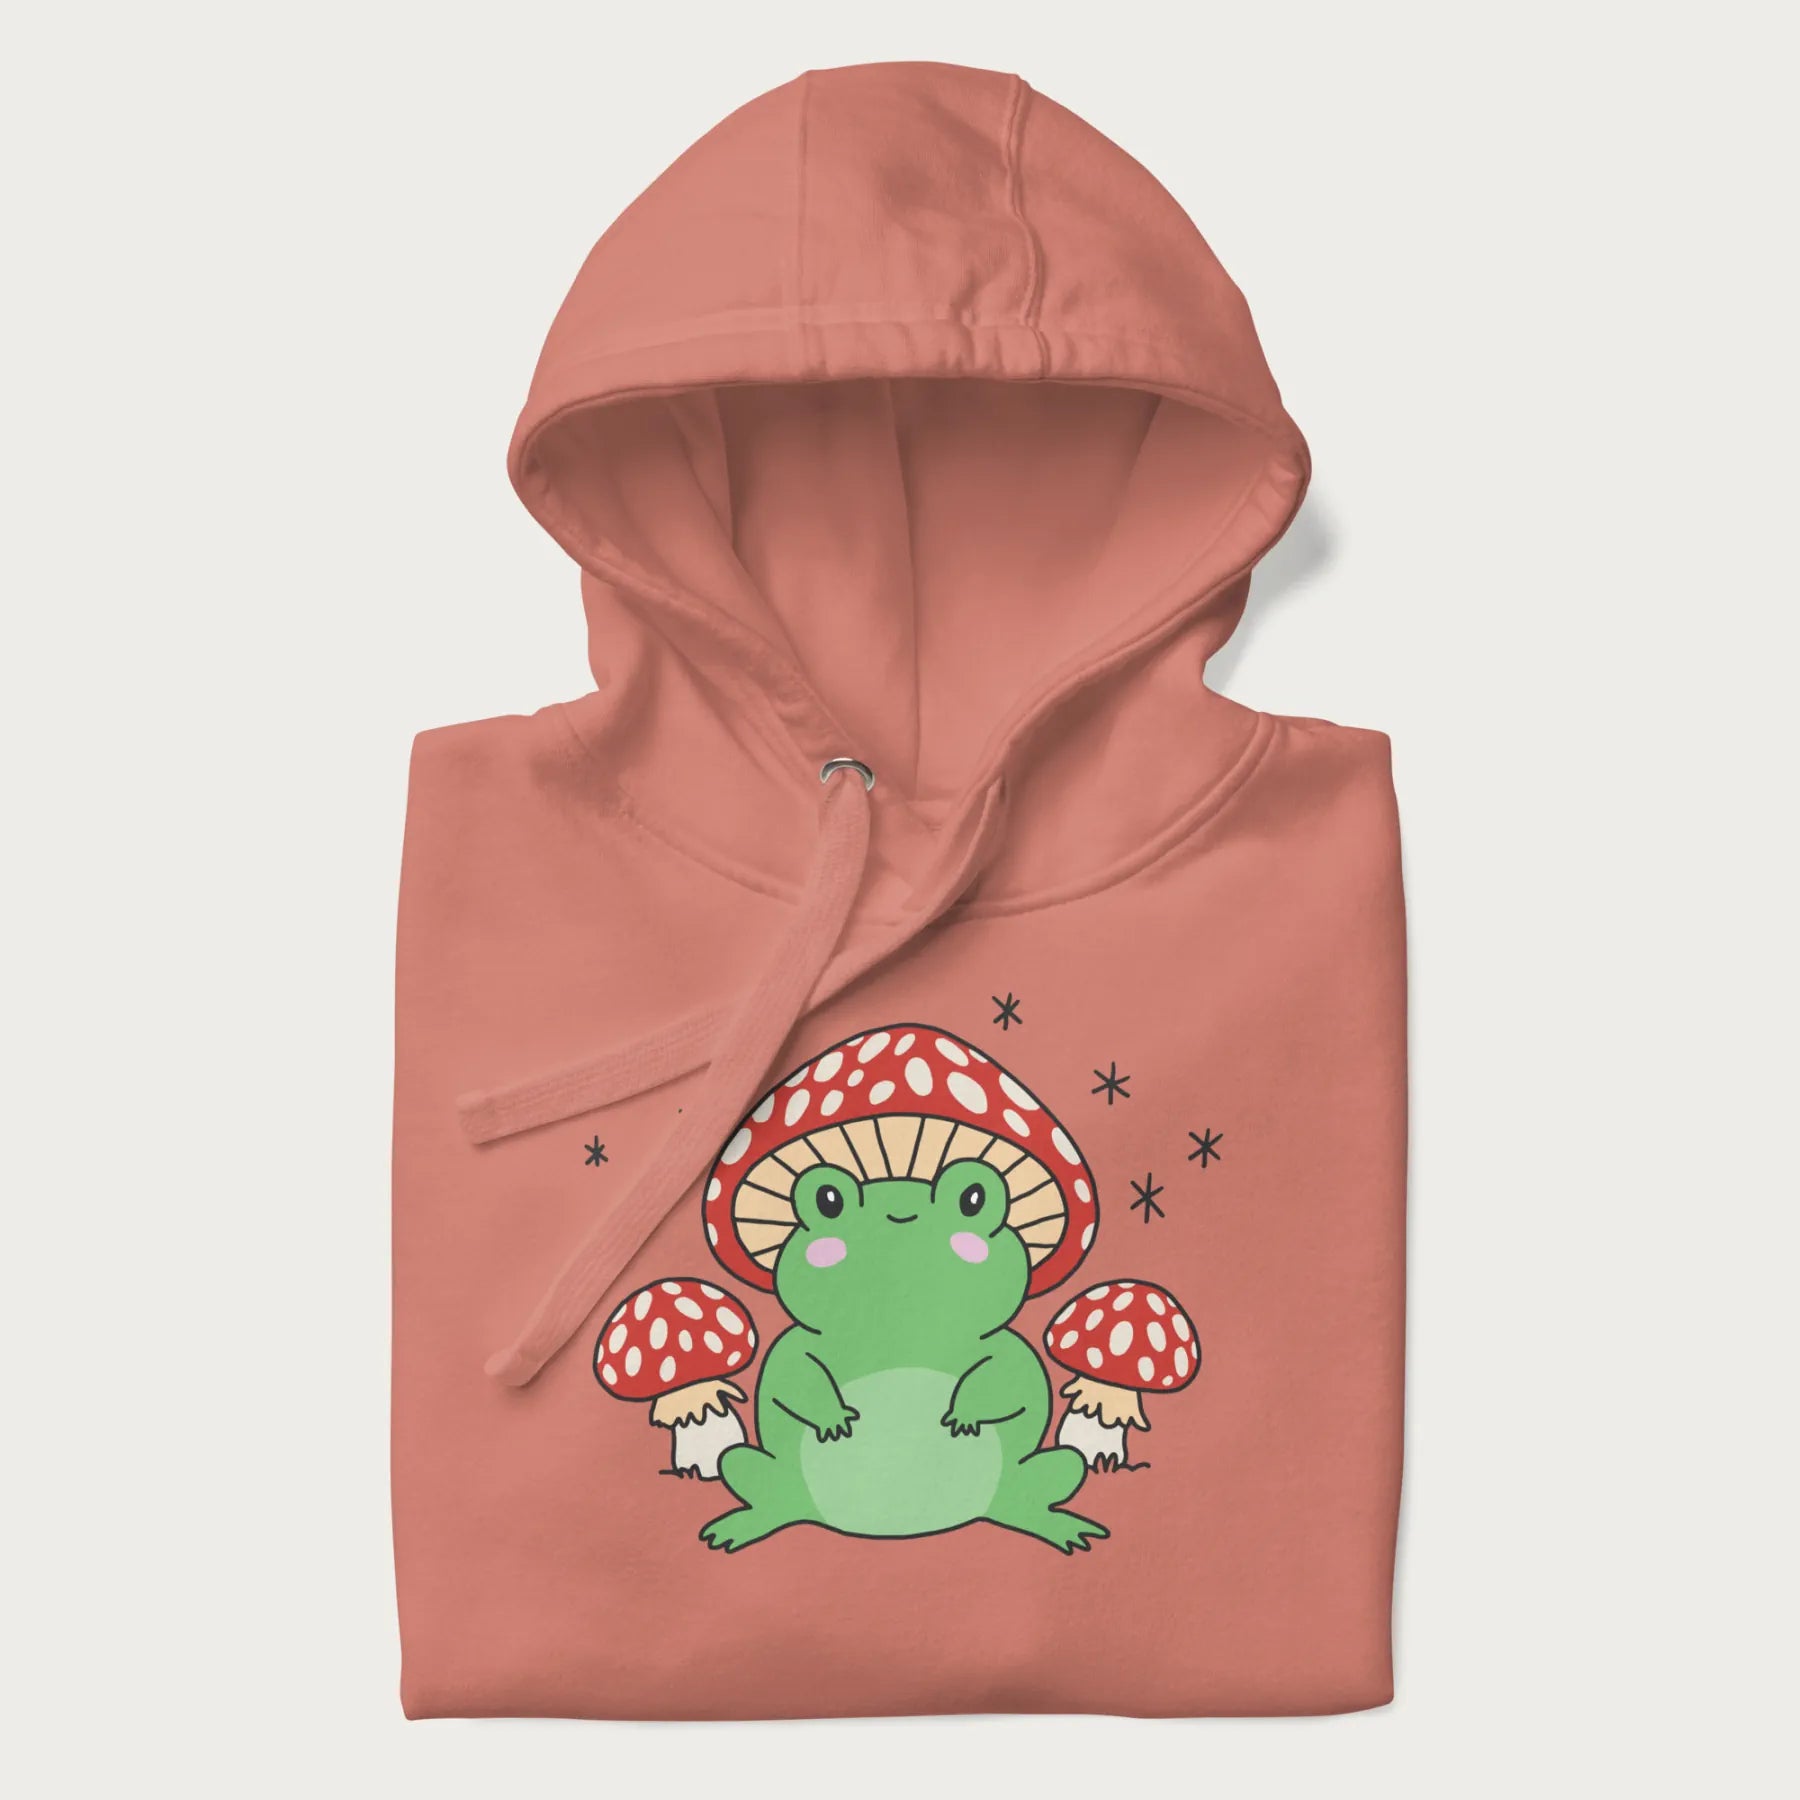 Folded light pink hoodie will illustration of a cute green frog with red and white mushrooms.